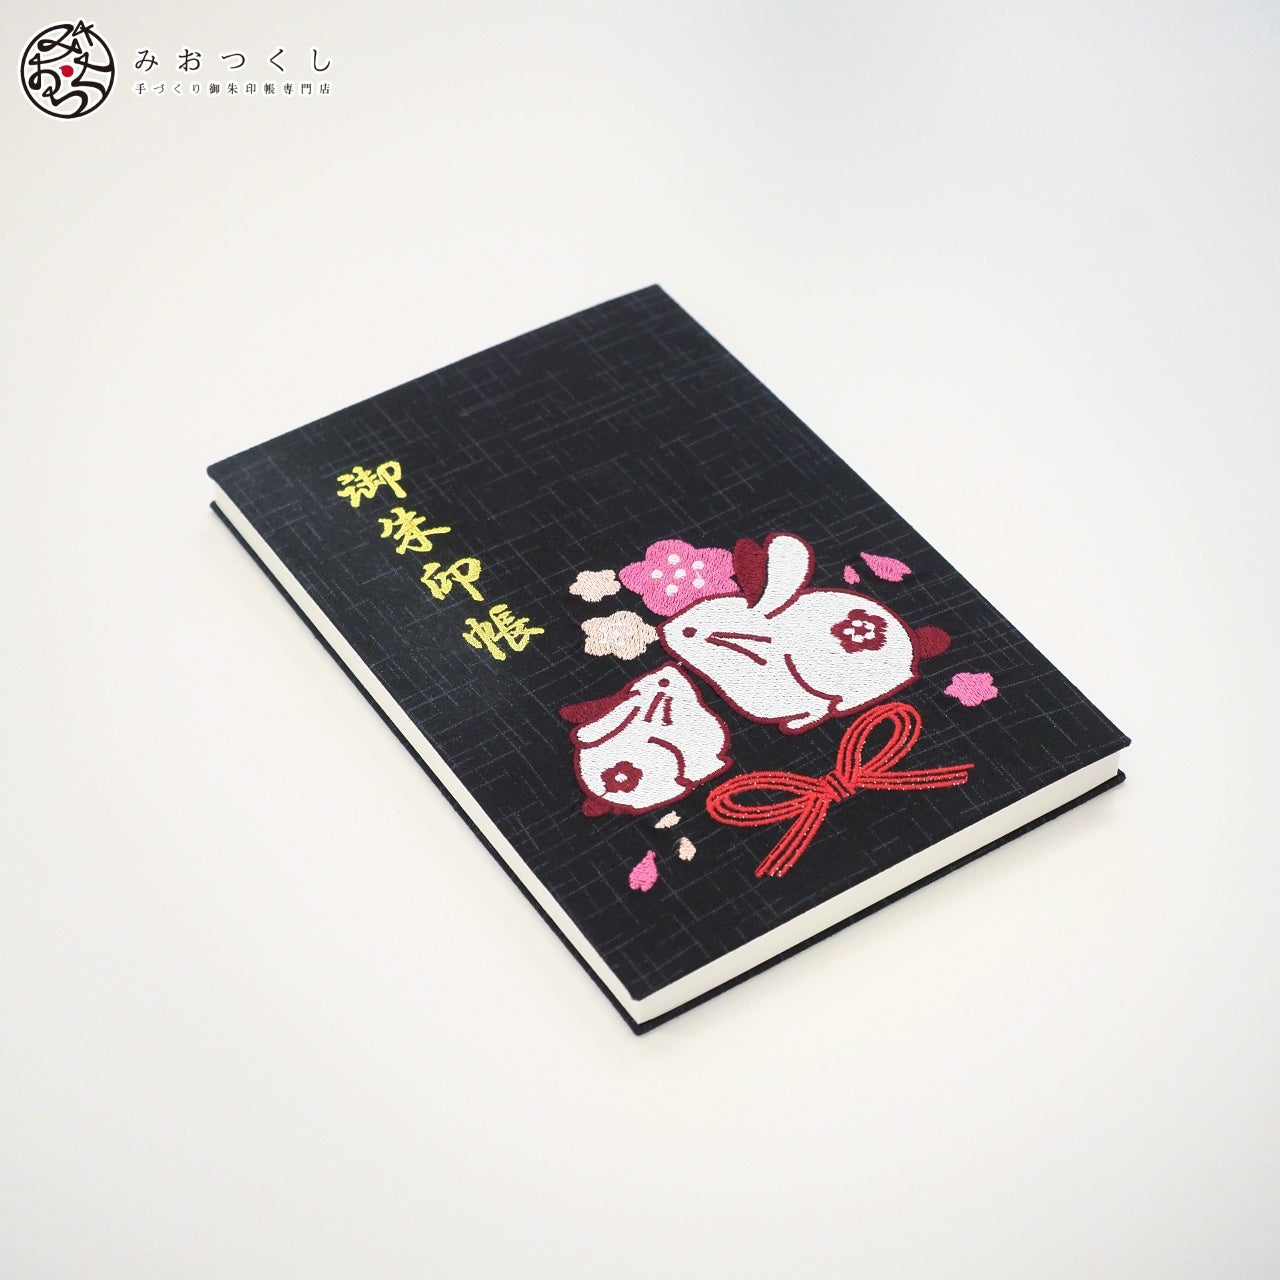 Goshuin book "Limited quantity" embroidery goshuin book/Rabbit (black)